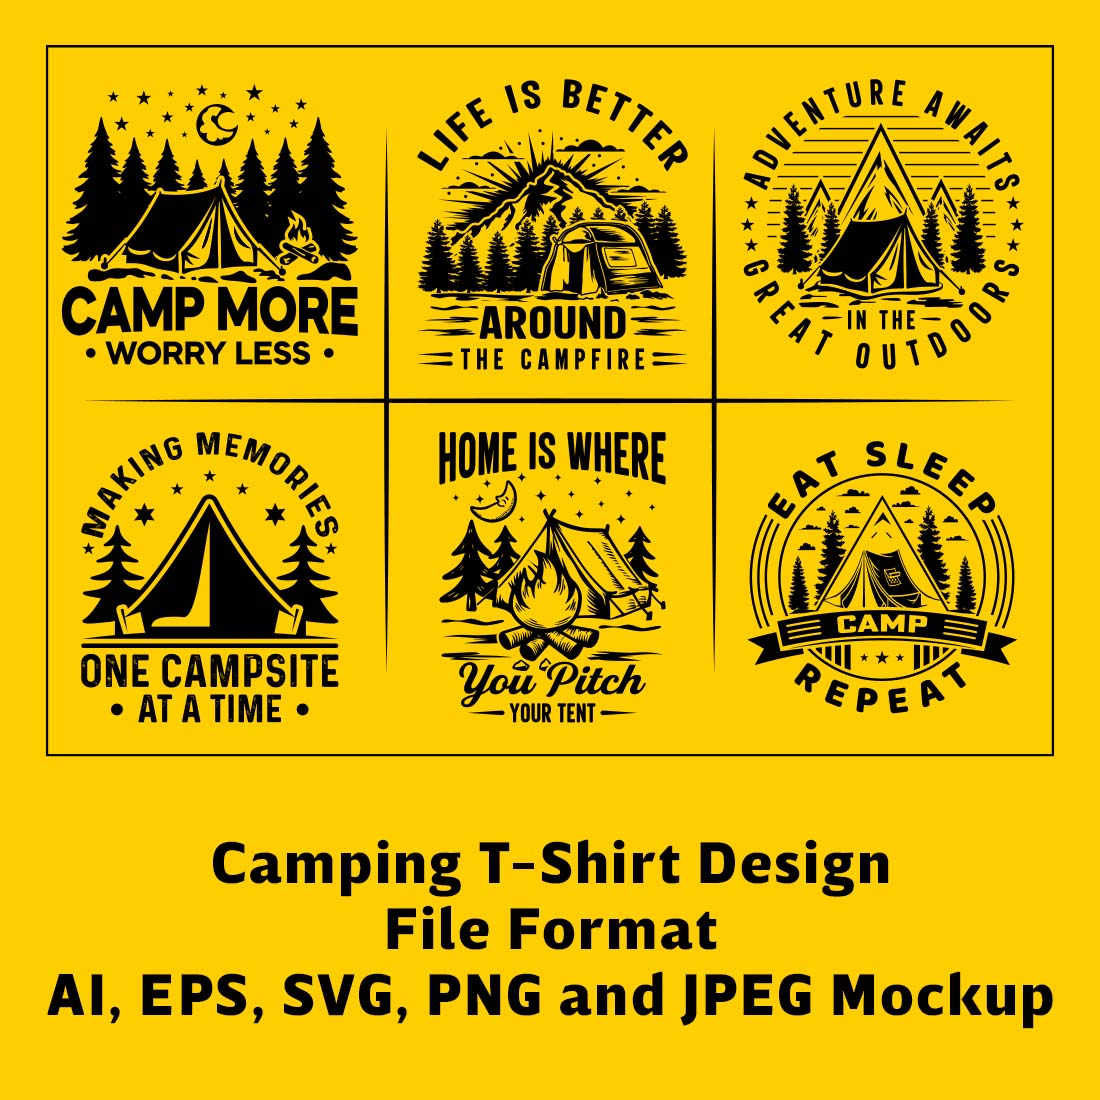 Camping t-shirt design cover image.